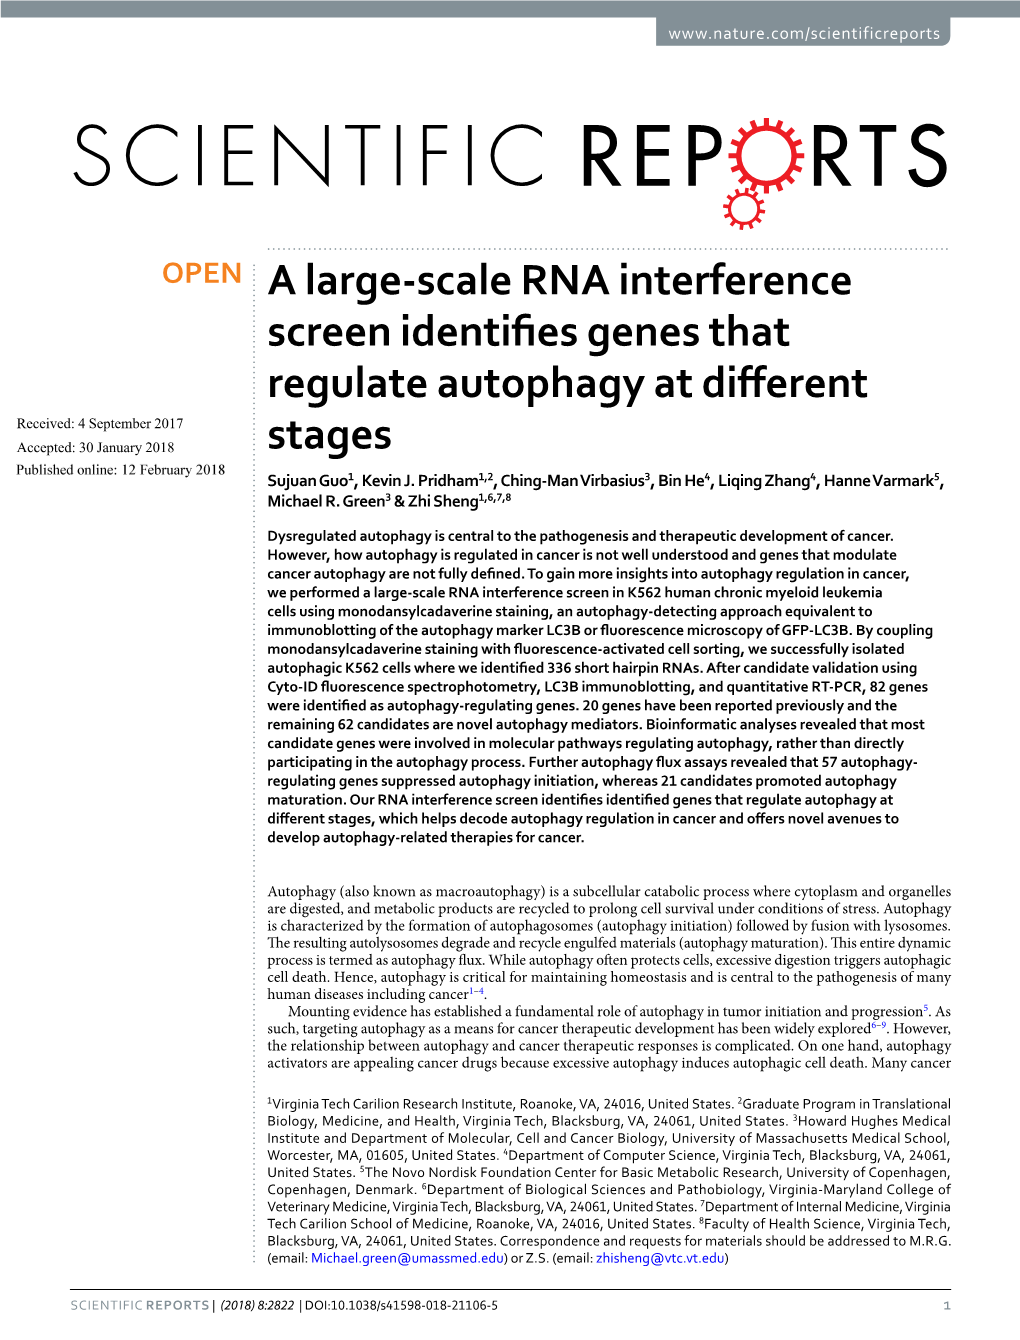 A Large-Scale RNA Interference Screen Identifies Genes That Regulate